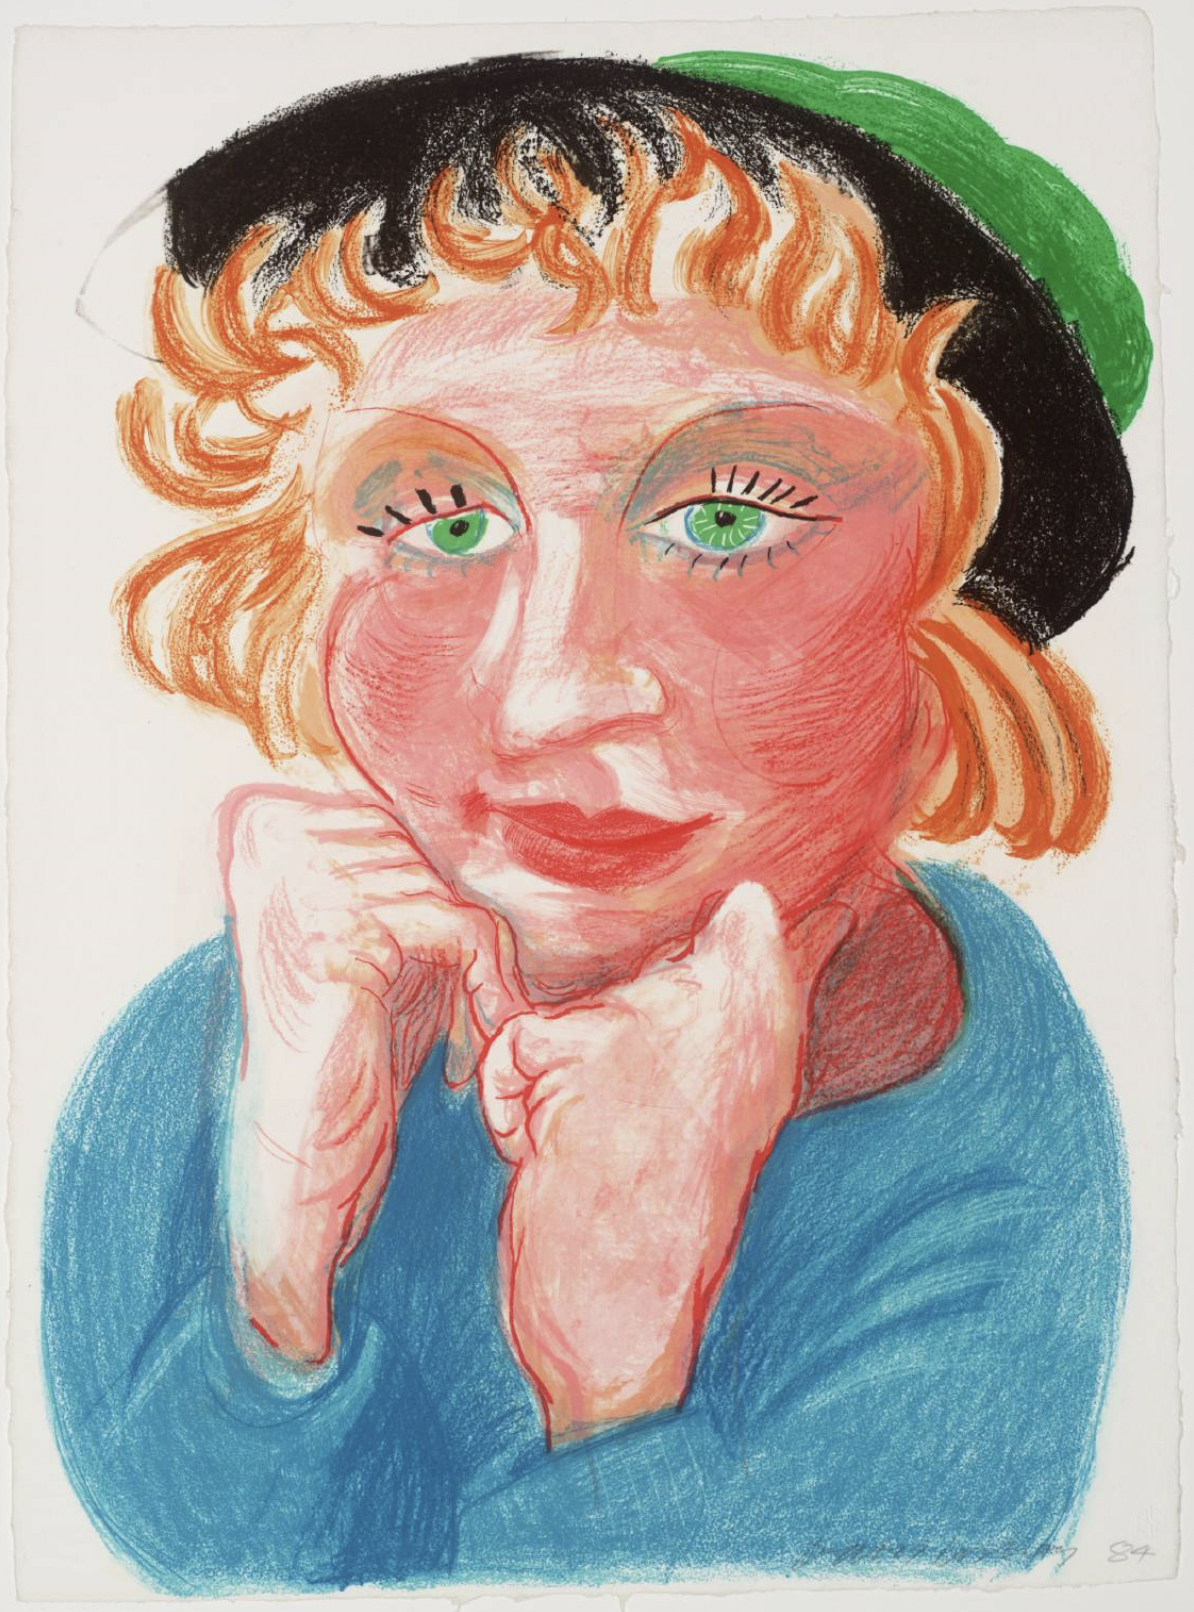 Celia, with Green Hat, from the “Moving Focus” Series by David Hockney